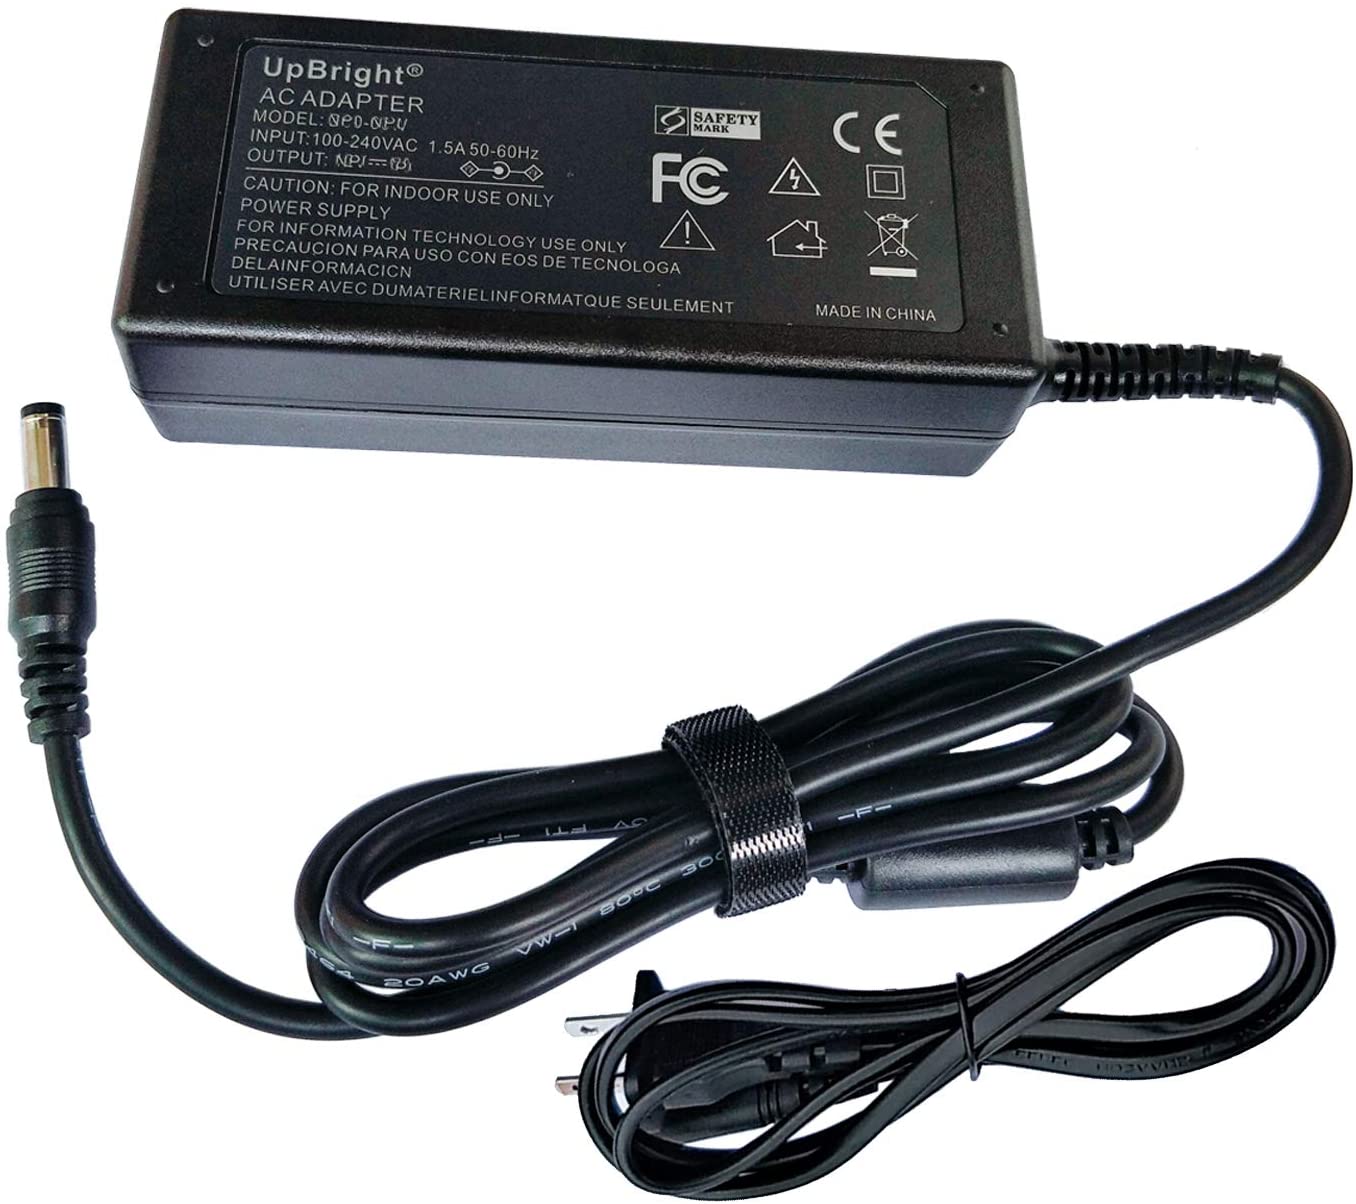 UPBRIGHT Adapter For Epson Perfection B11B198022 B11B198032 Photo Scanner Power Supply Cord Charger PSU - image 1 of 5